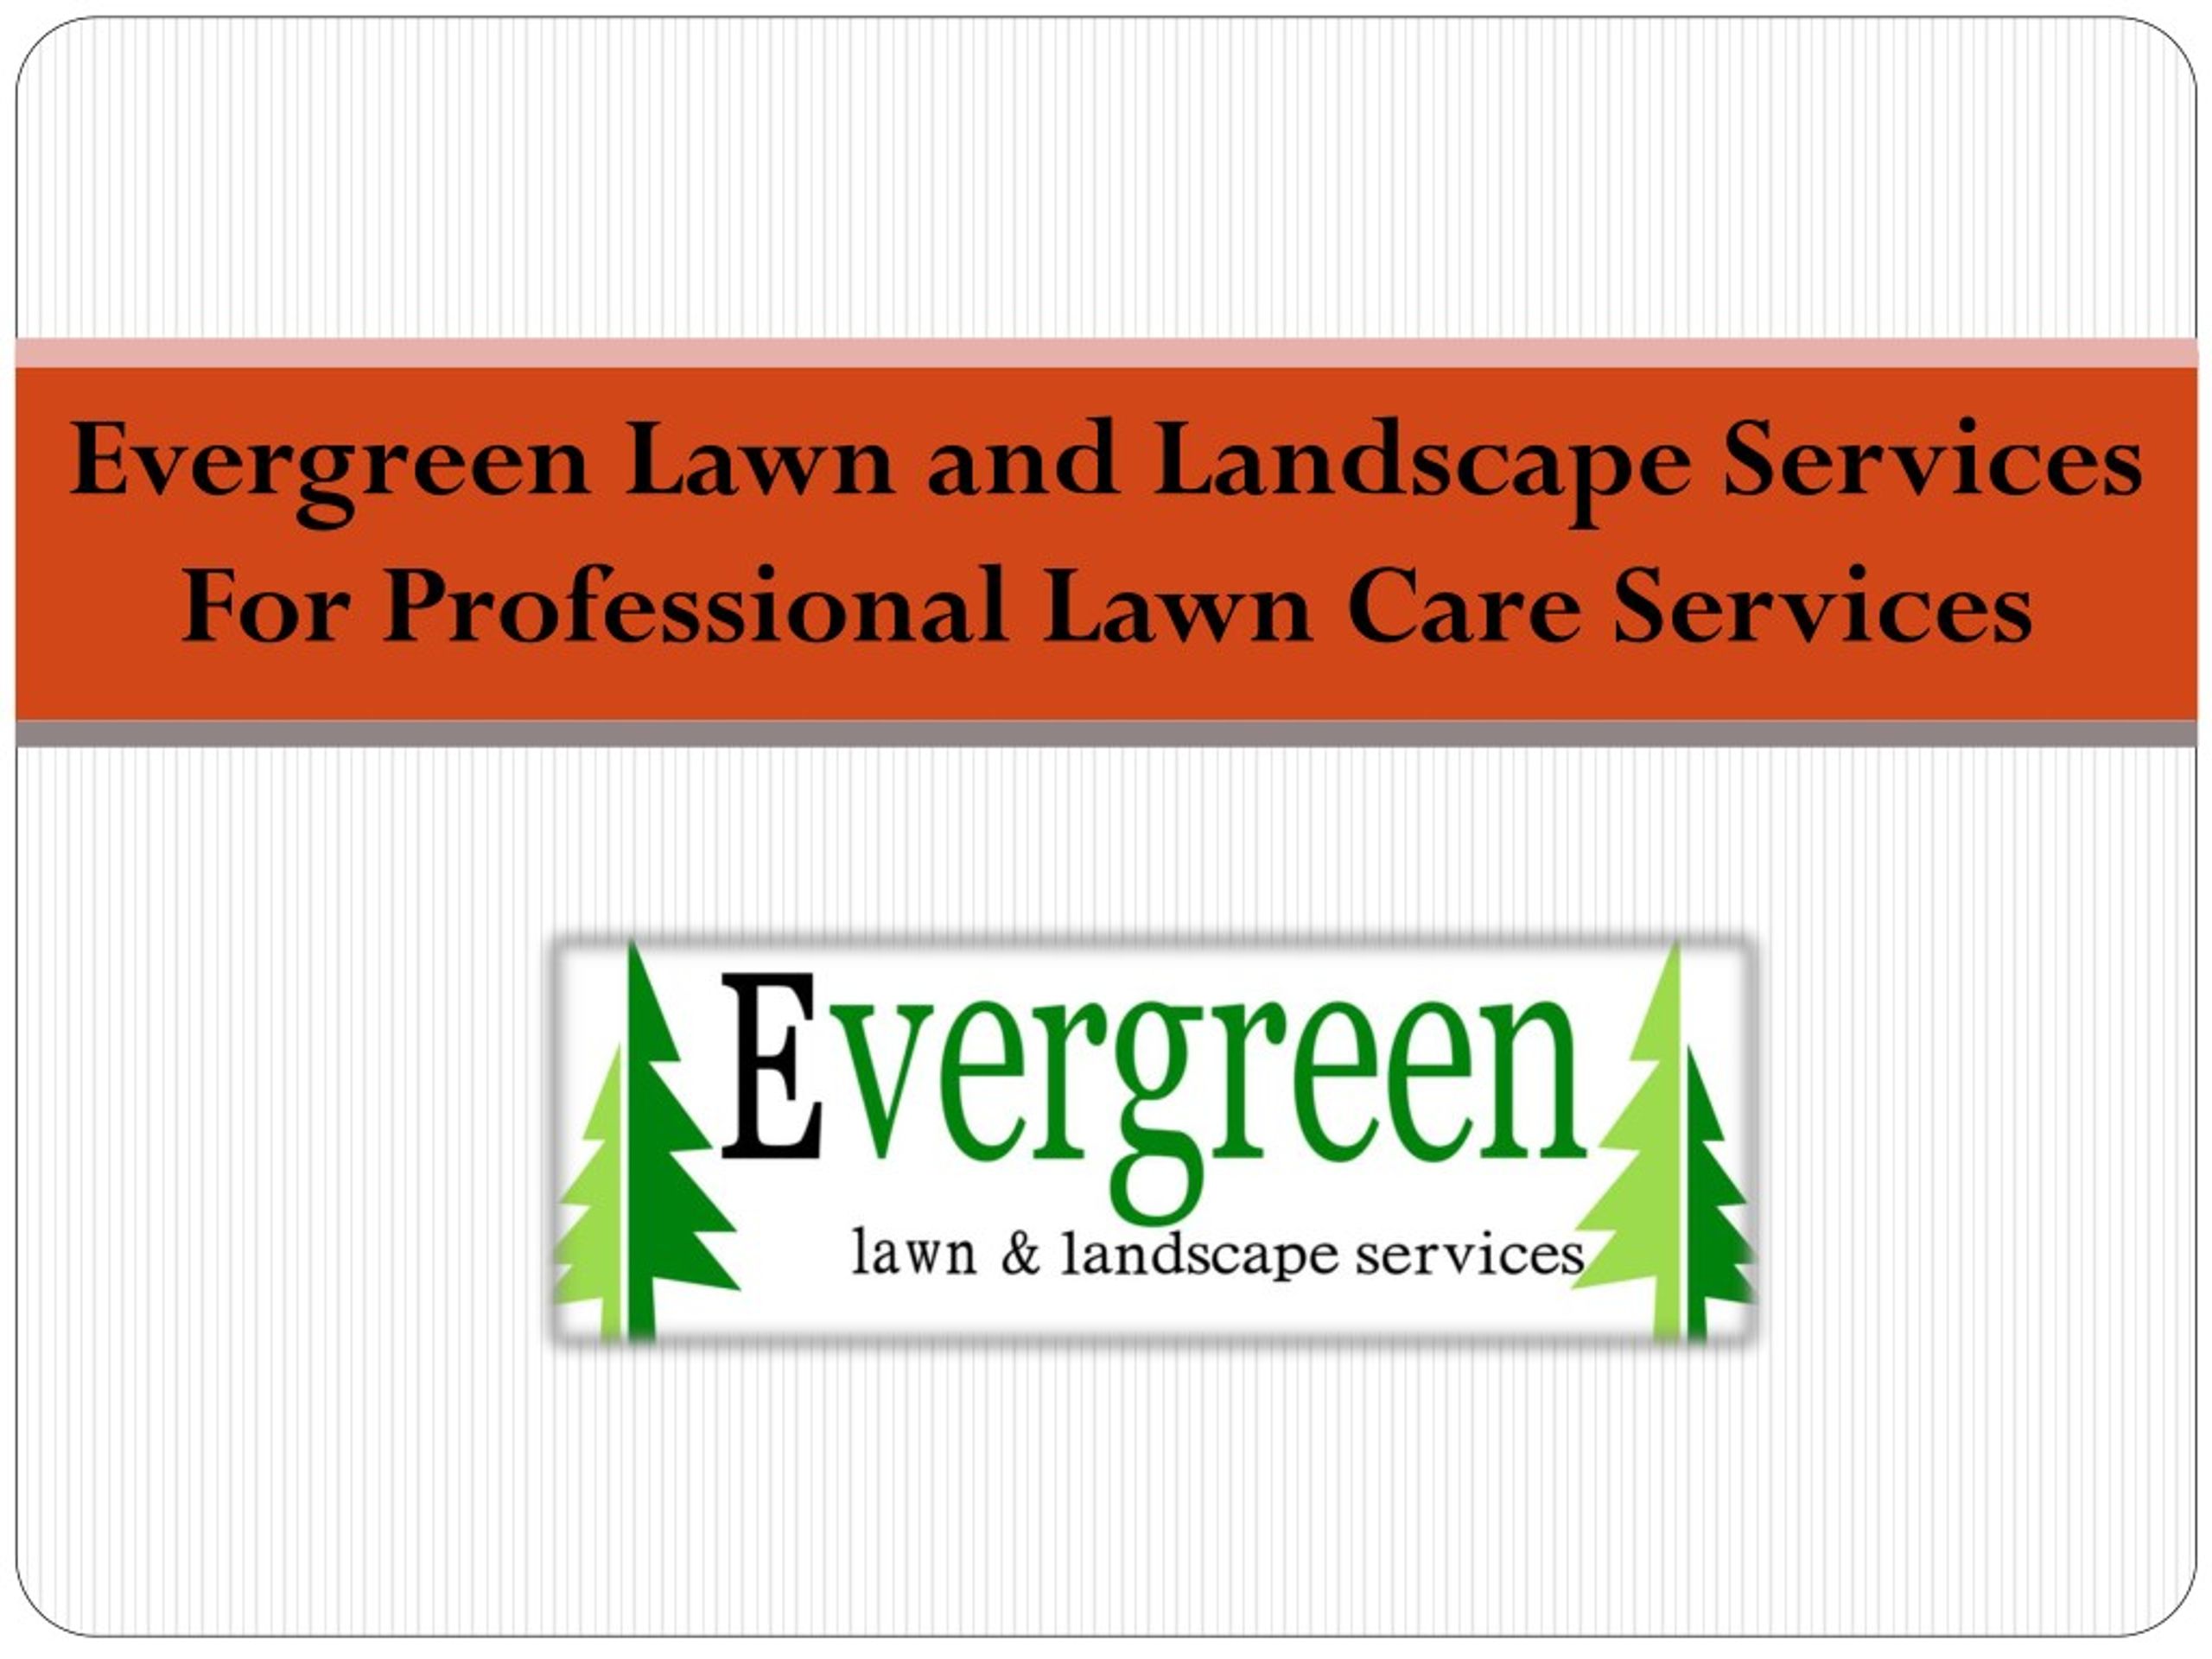 Evergreen Lawn And Landscape Services, Evergreen Lawn And Landscape